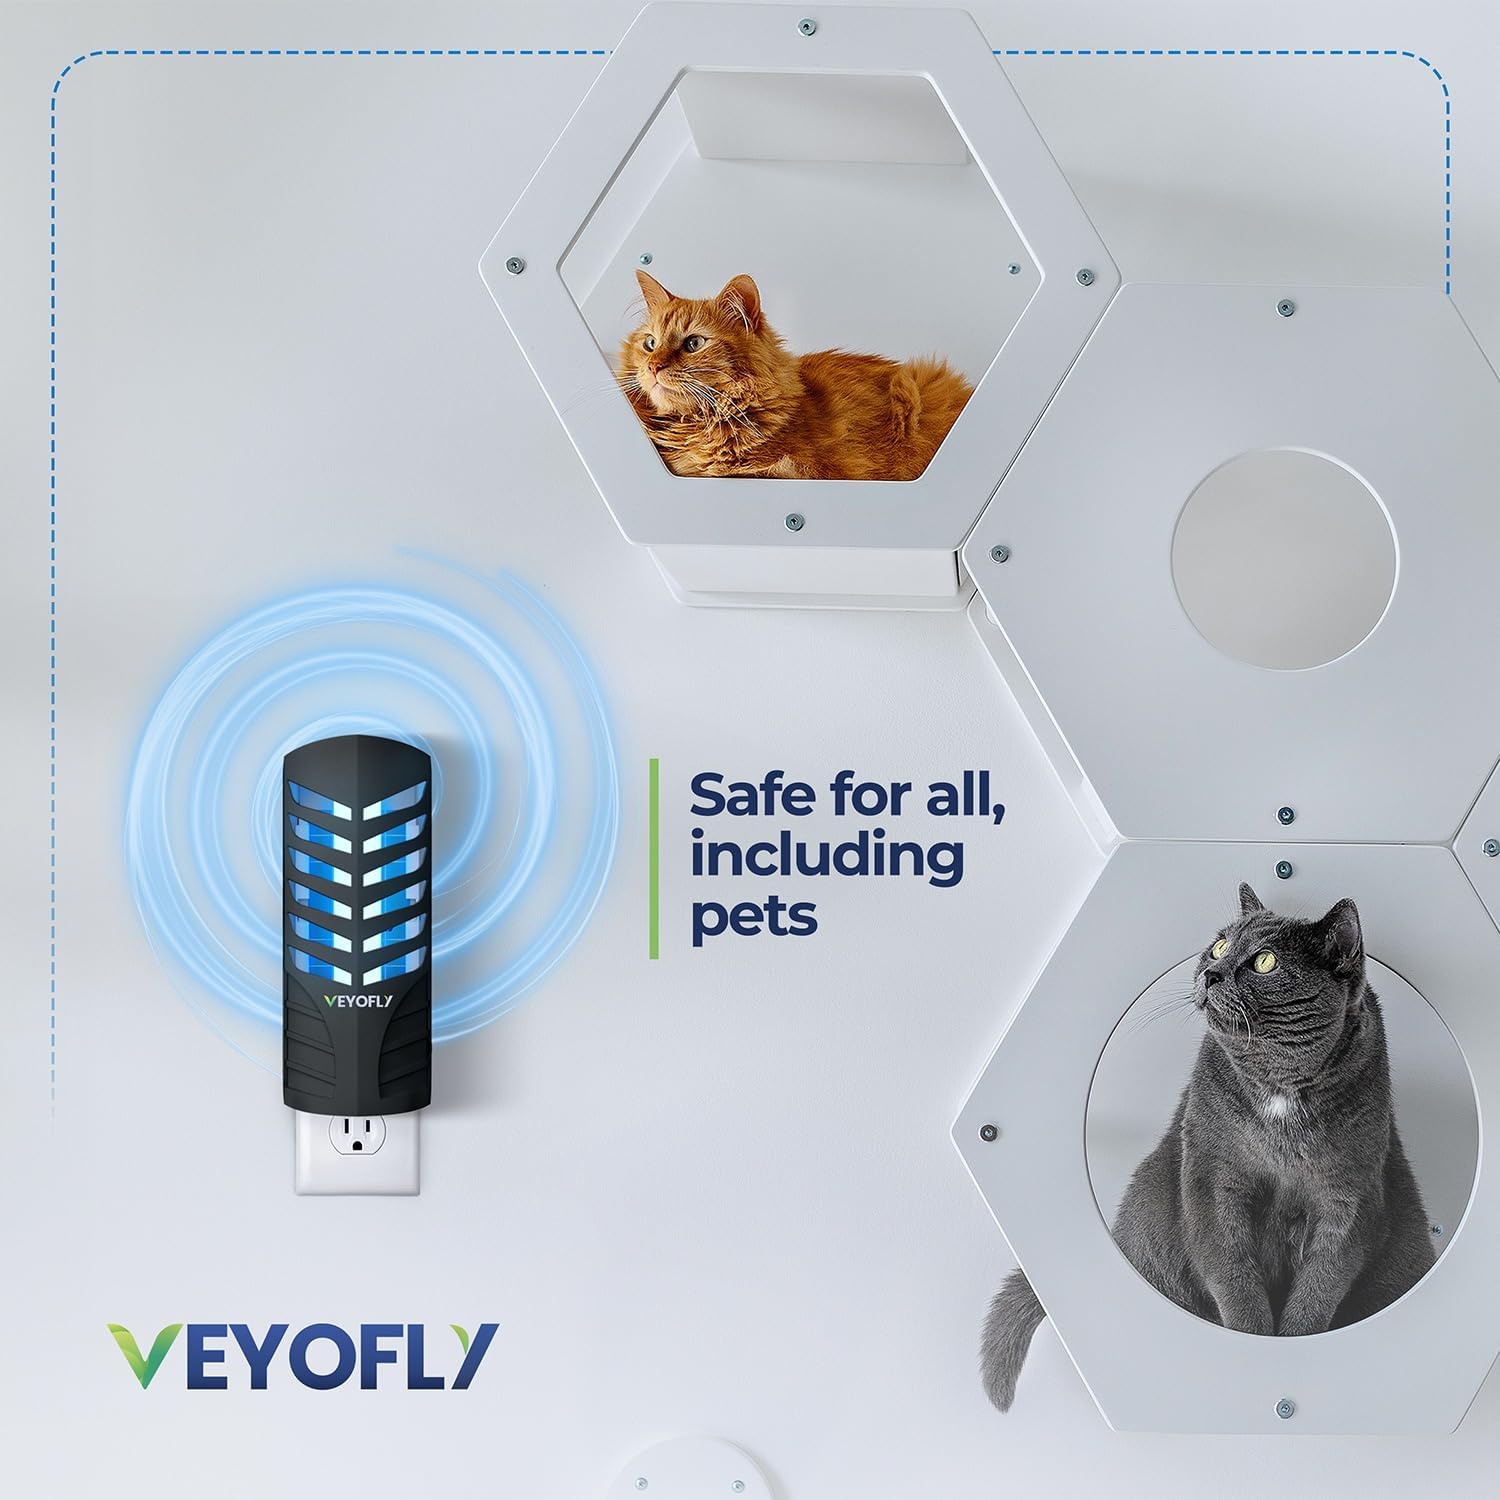 Wholesale prices with free shipping all over United States VEYOFLY Fly Trap, Plug in Flying Insect Trap, Fruit Fly Traps for Indoors-Safer Home Indoor- Bug Light Indoor Plug in- Mosquito,Fruit Fly, Gnat Trap, Flea Trap, Bugs- No Odor (2 Device+6 Refills) - Steven Deals